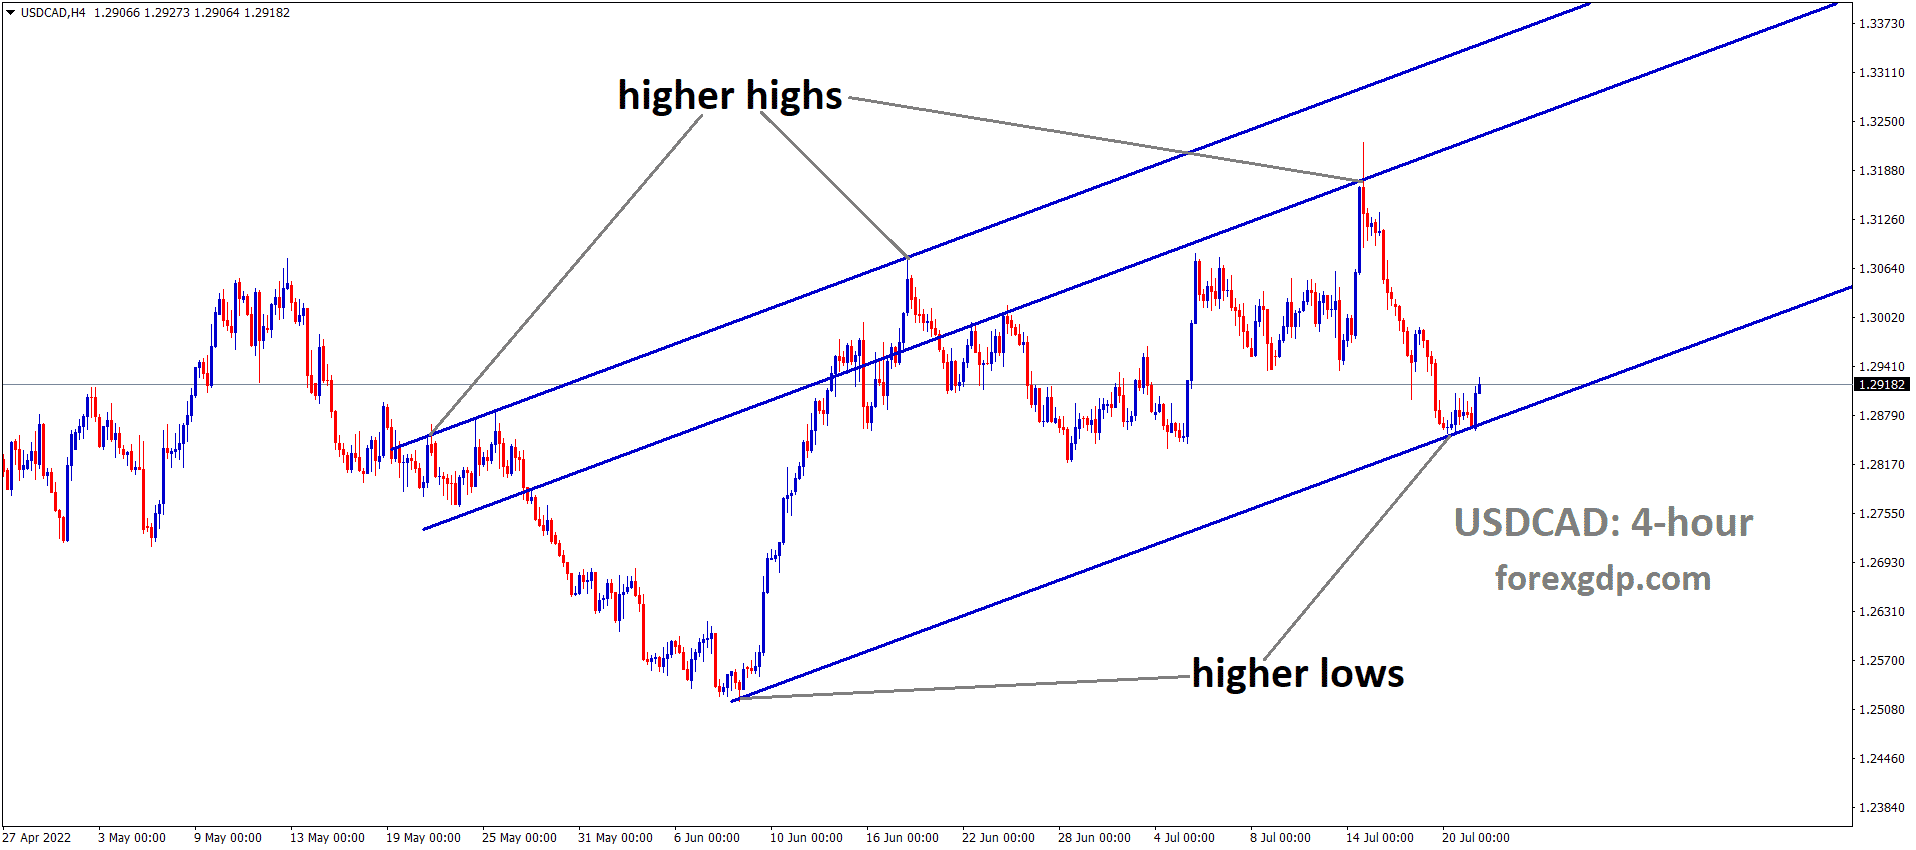 USDCAD is moving in an Ascending channel and the Market has rebounded from the higher low area of the channel